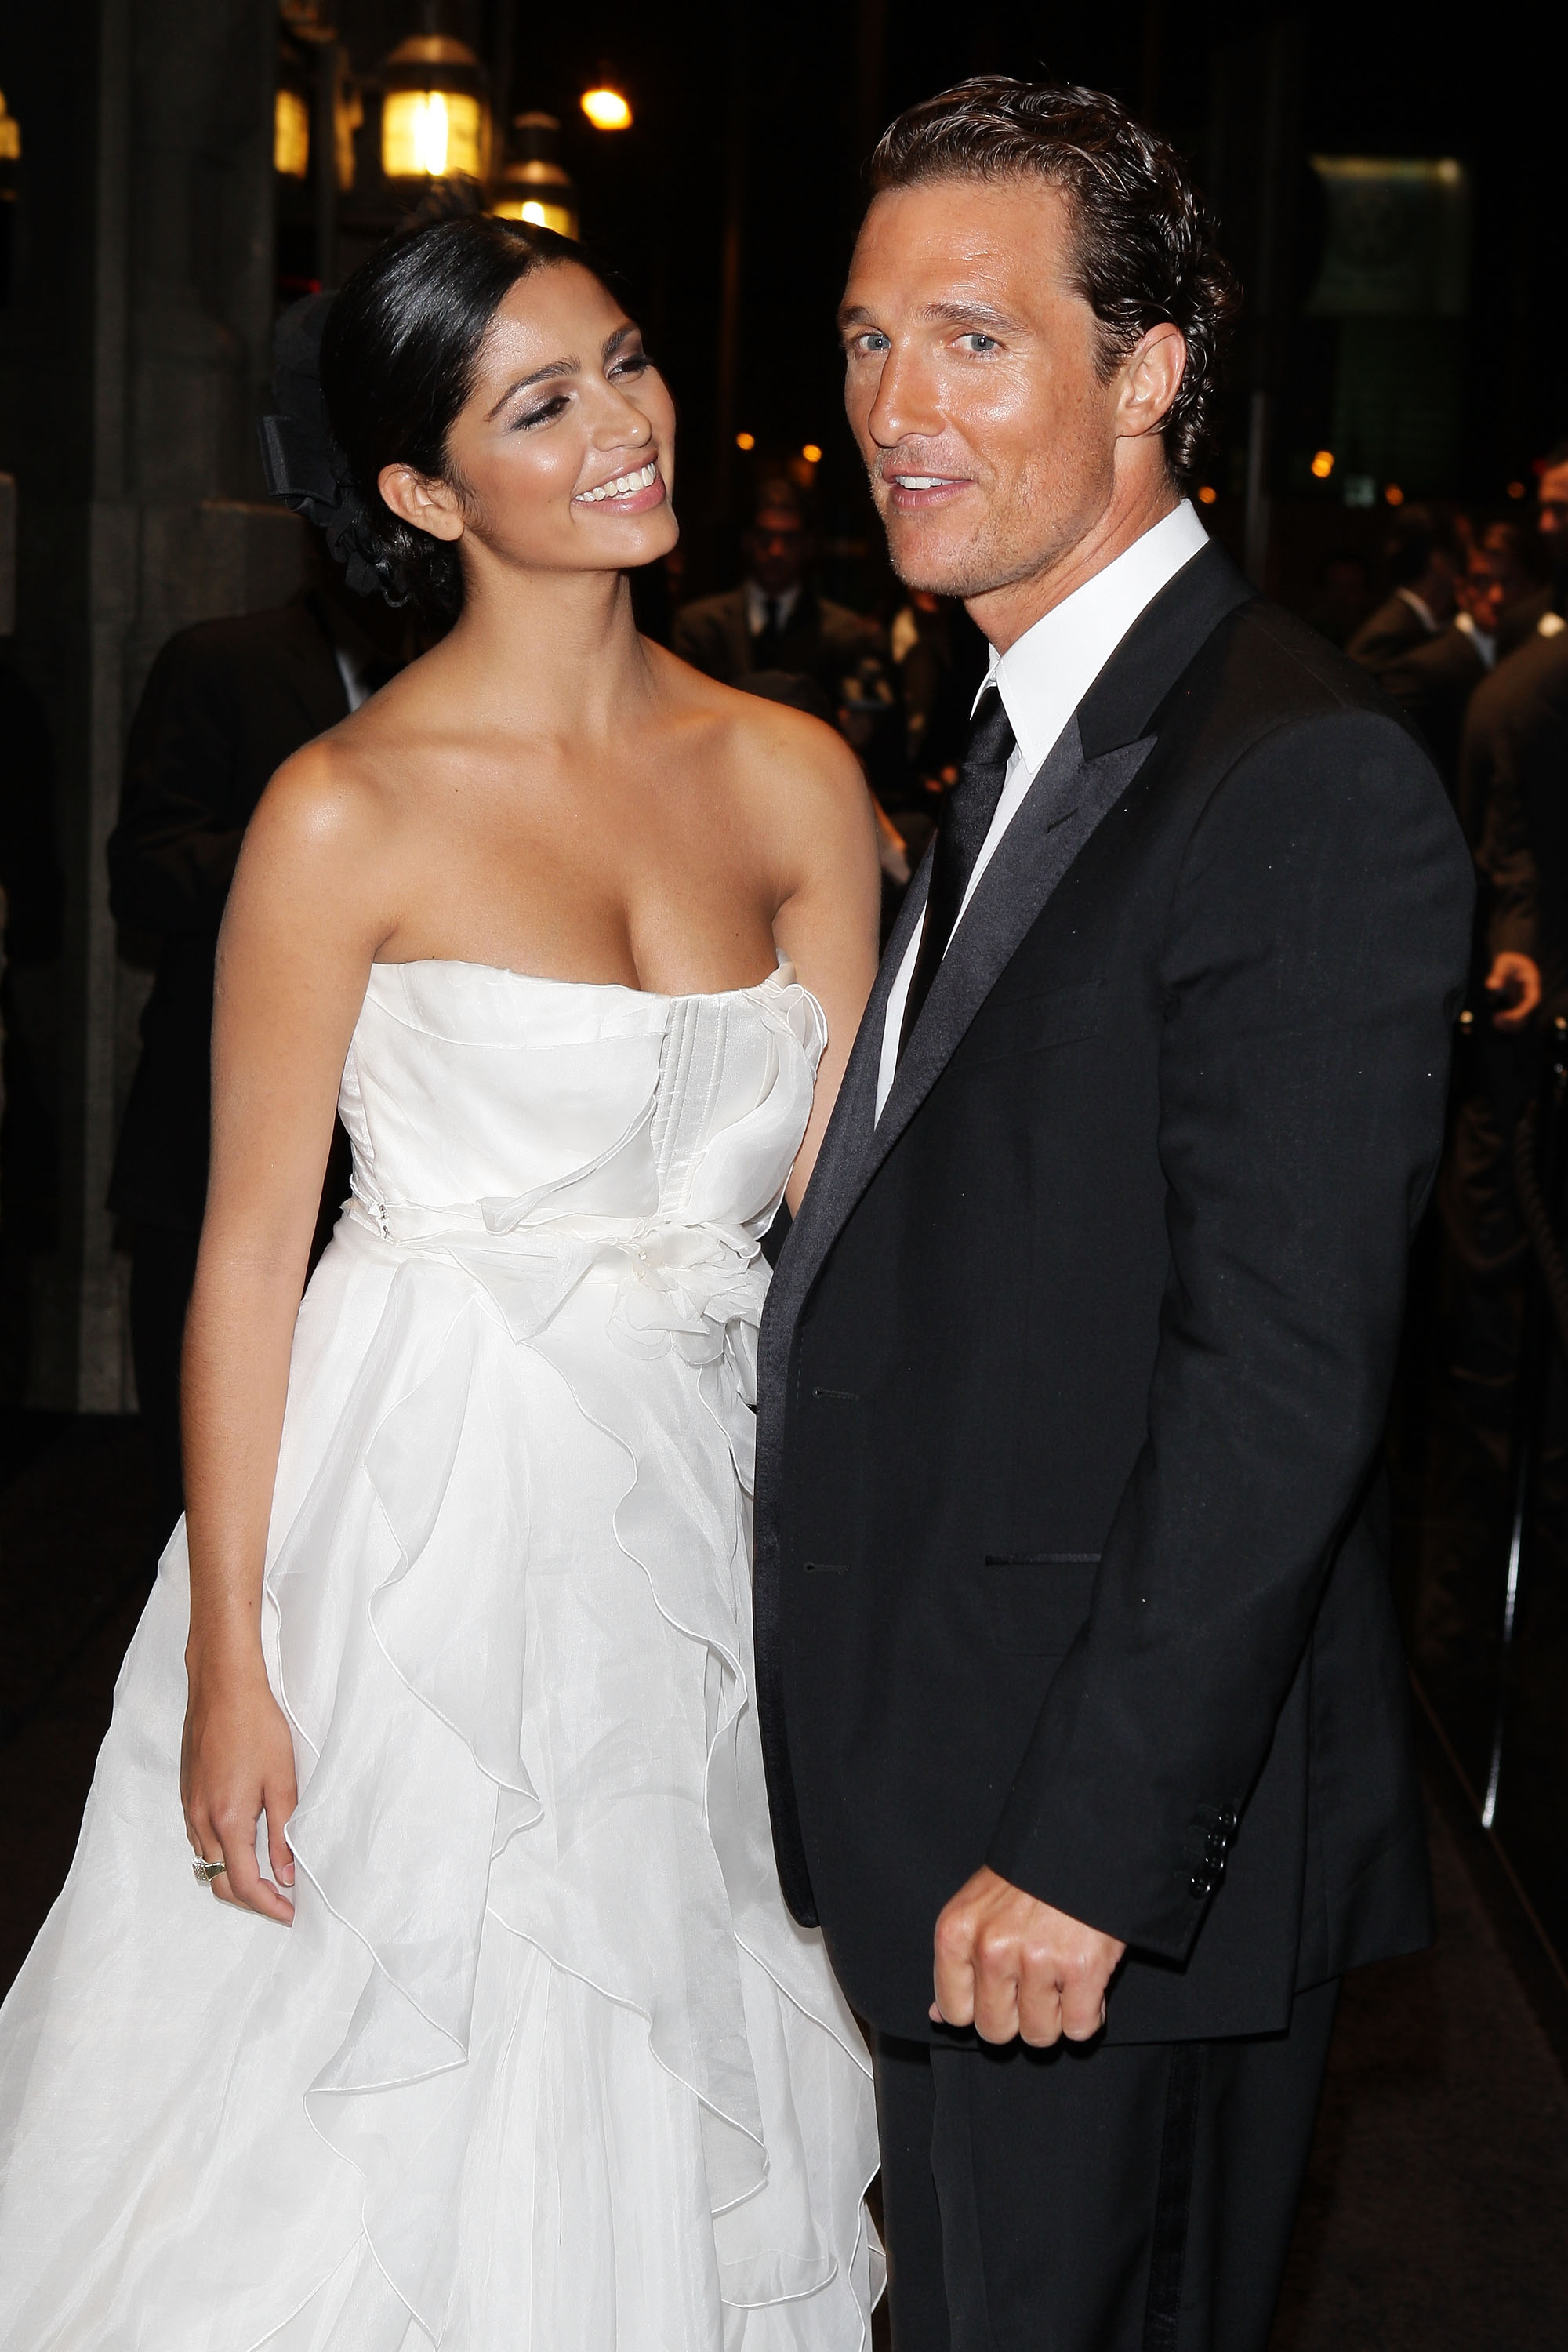 Matthew McConaughey and Camila Alves on September 25, 2008 in Milan, Italy | Source: Getty Images